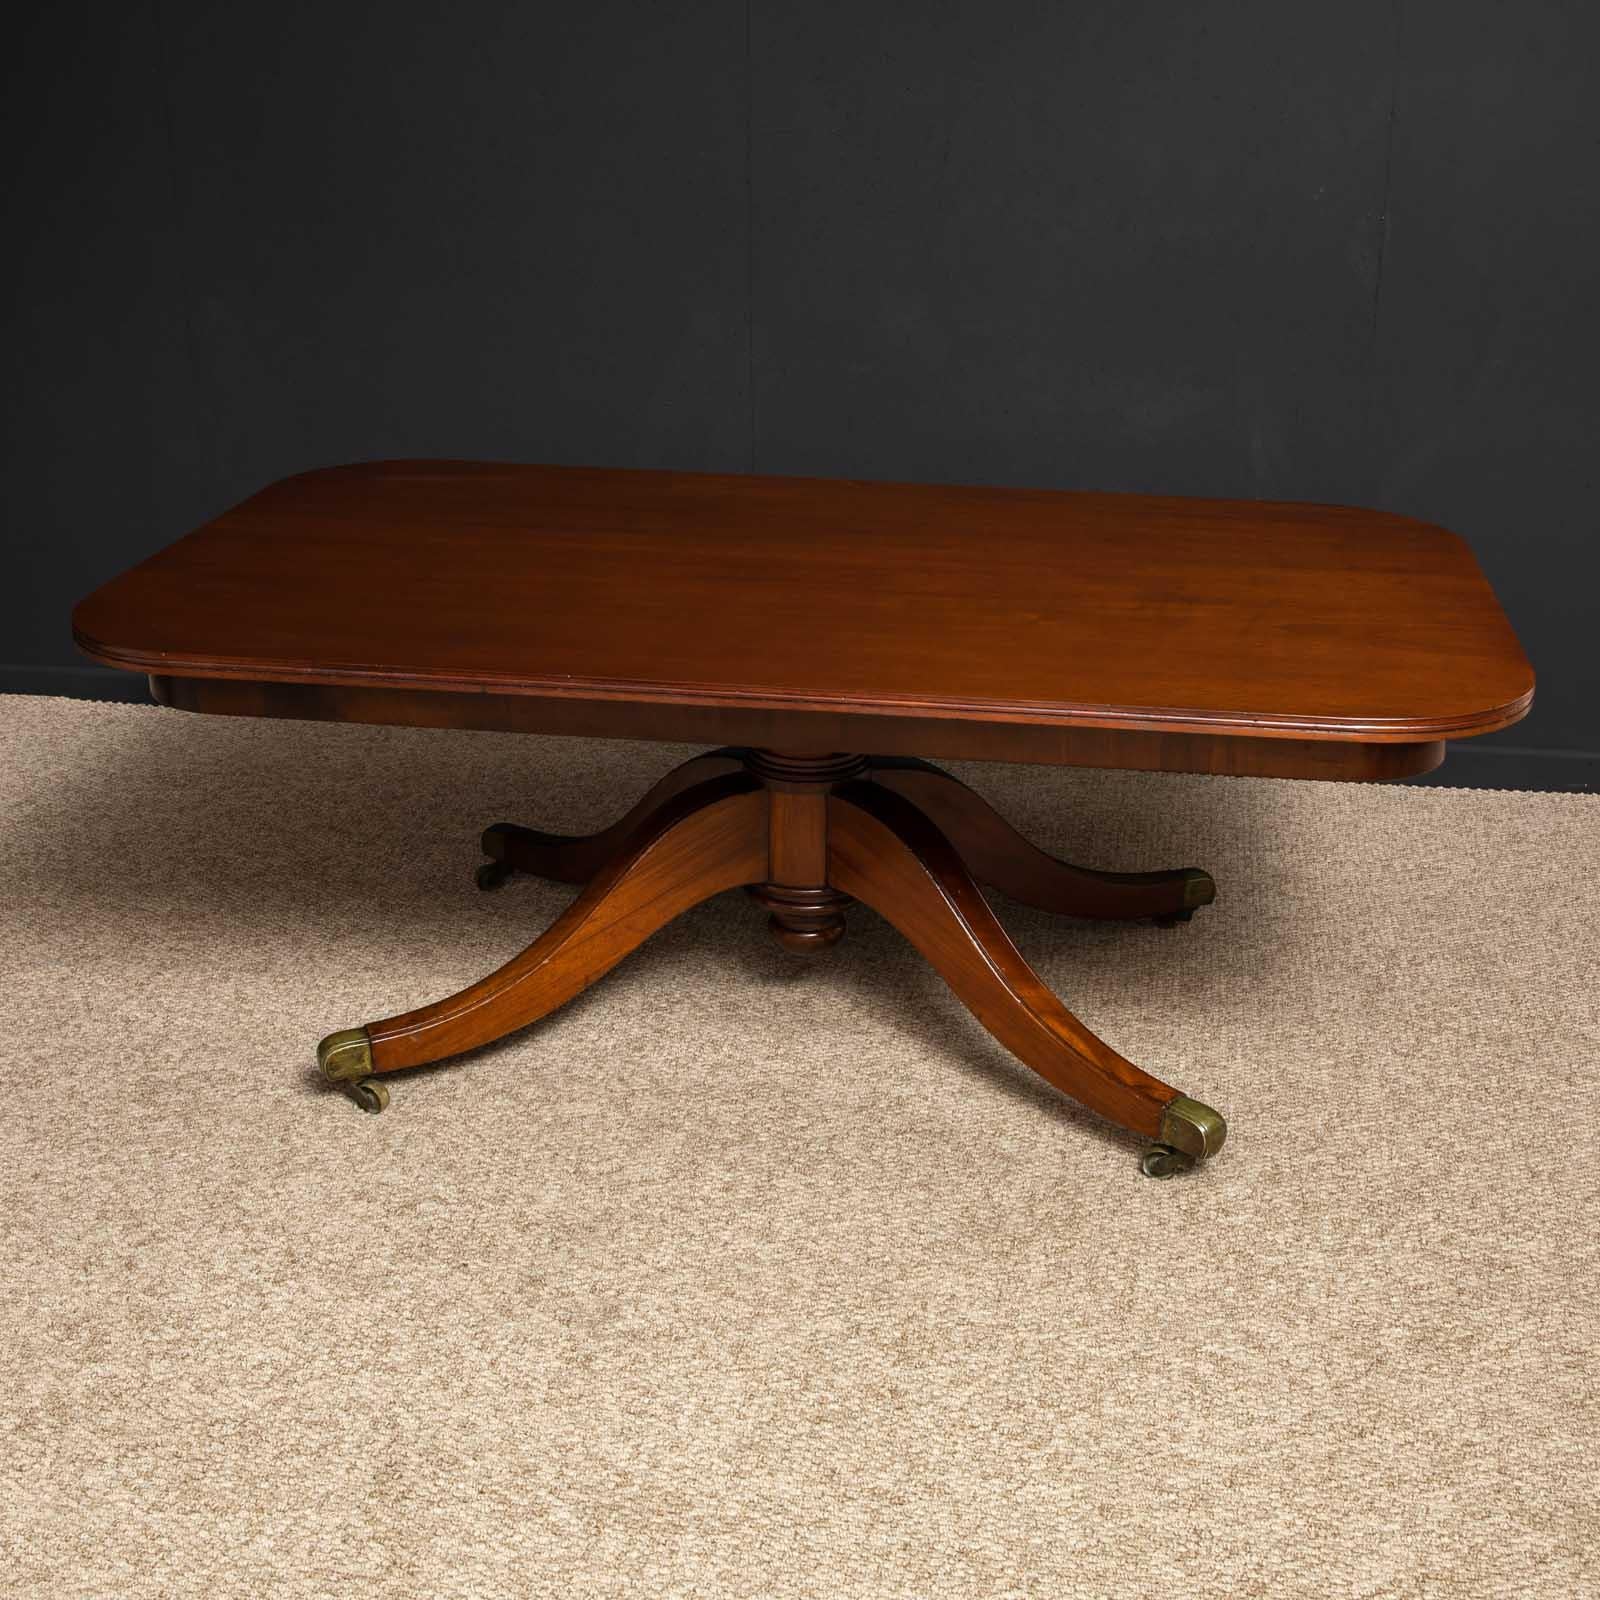 An unusually large Regency Revival mahogany table of elegant form. The splayed legs are very sturdy and still retain the original brass castors. There has been some veneer repairs to the underside, but they are not very visible. This table will